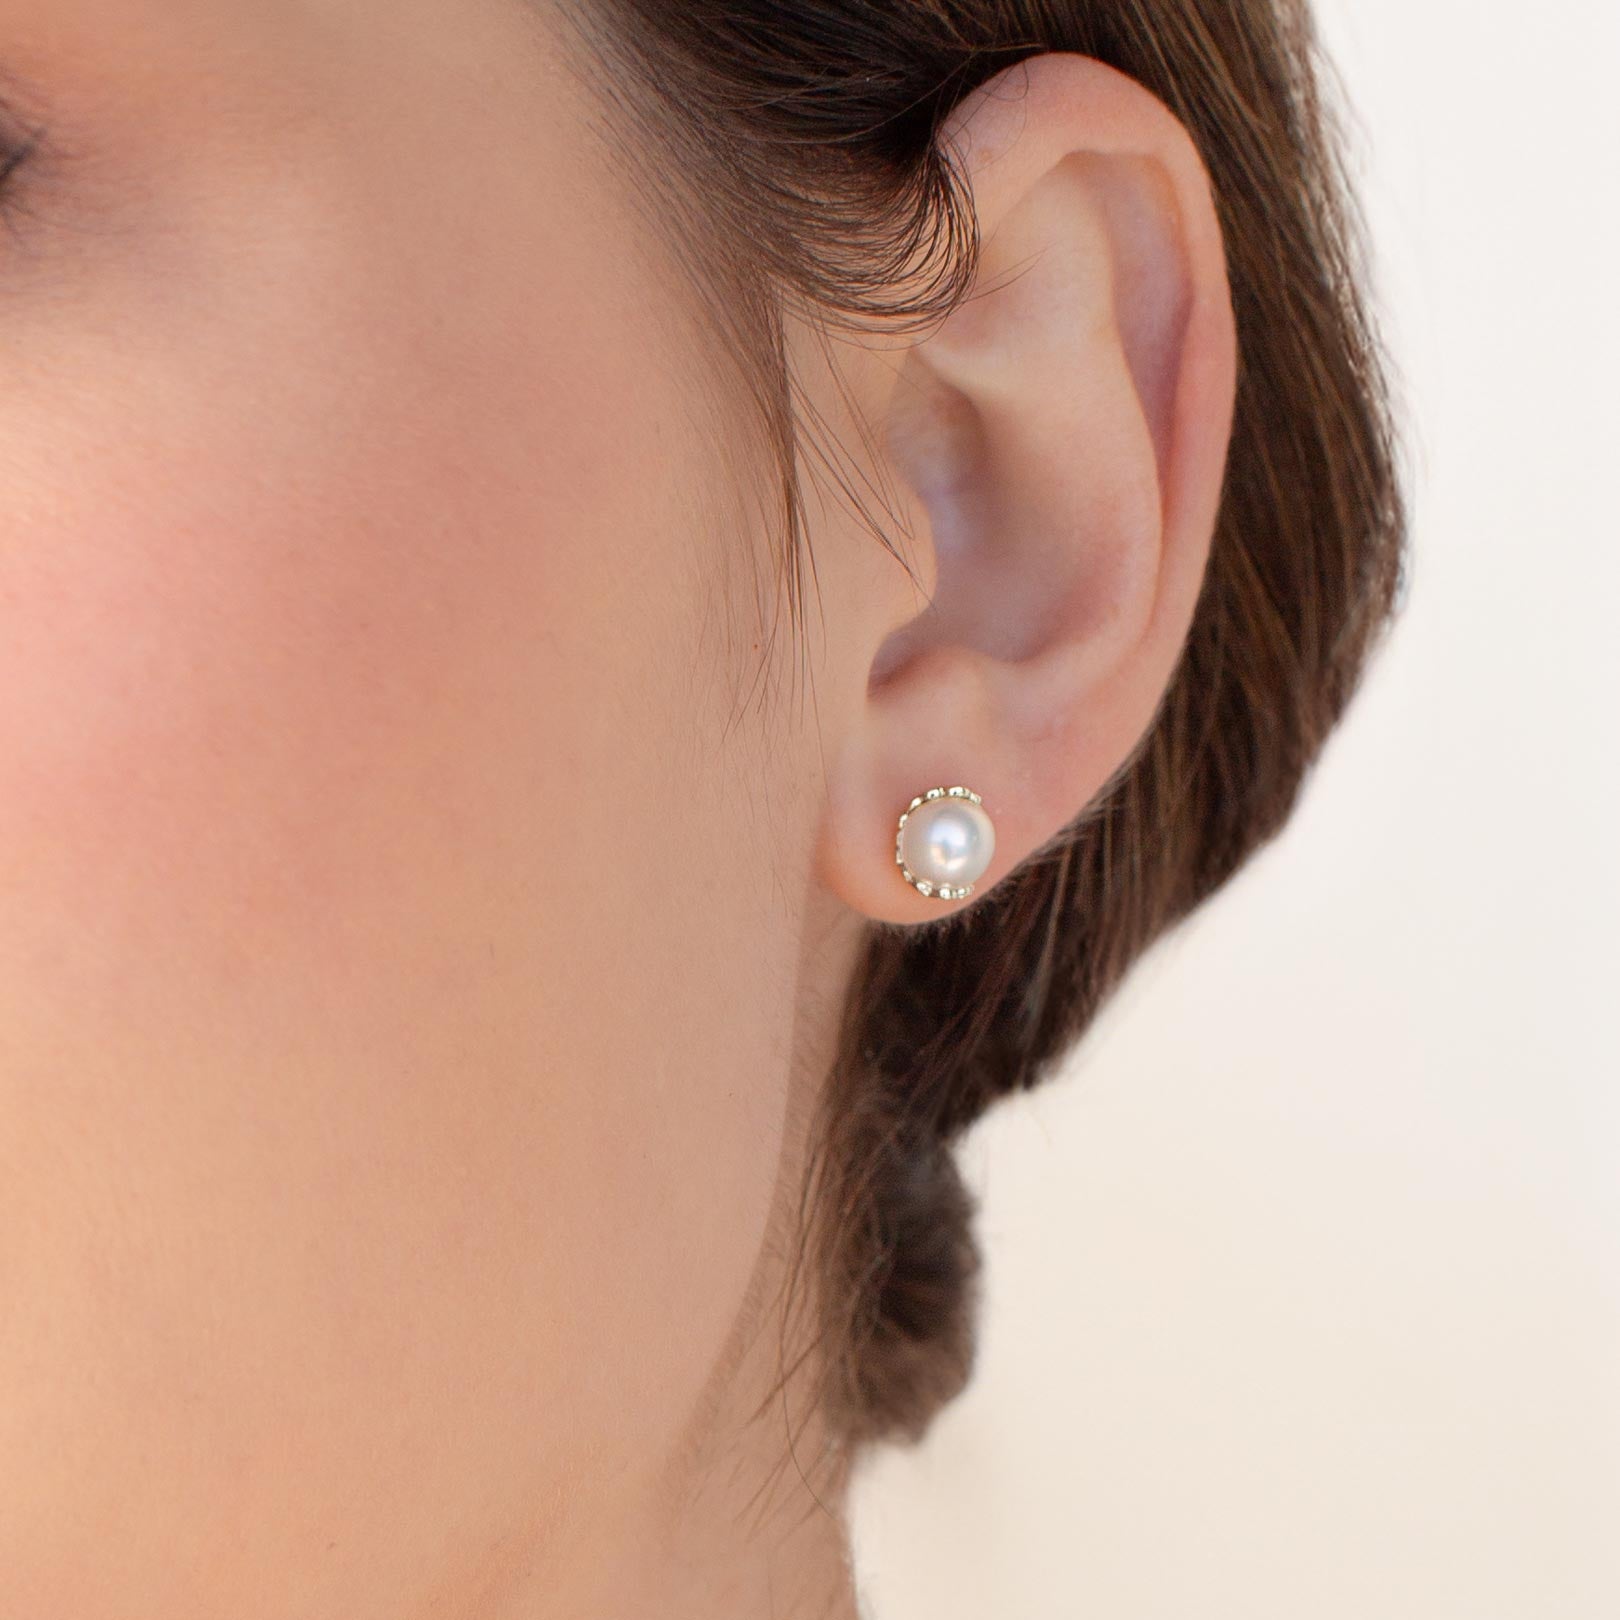 Close up of a christian woman wearing the sterling silver Shell Encased Pearl Earring from the Becoming Collection by Rizen Jewelry.